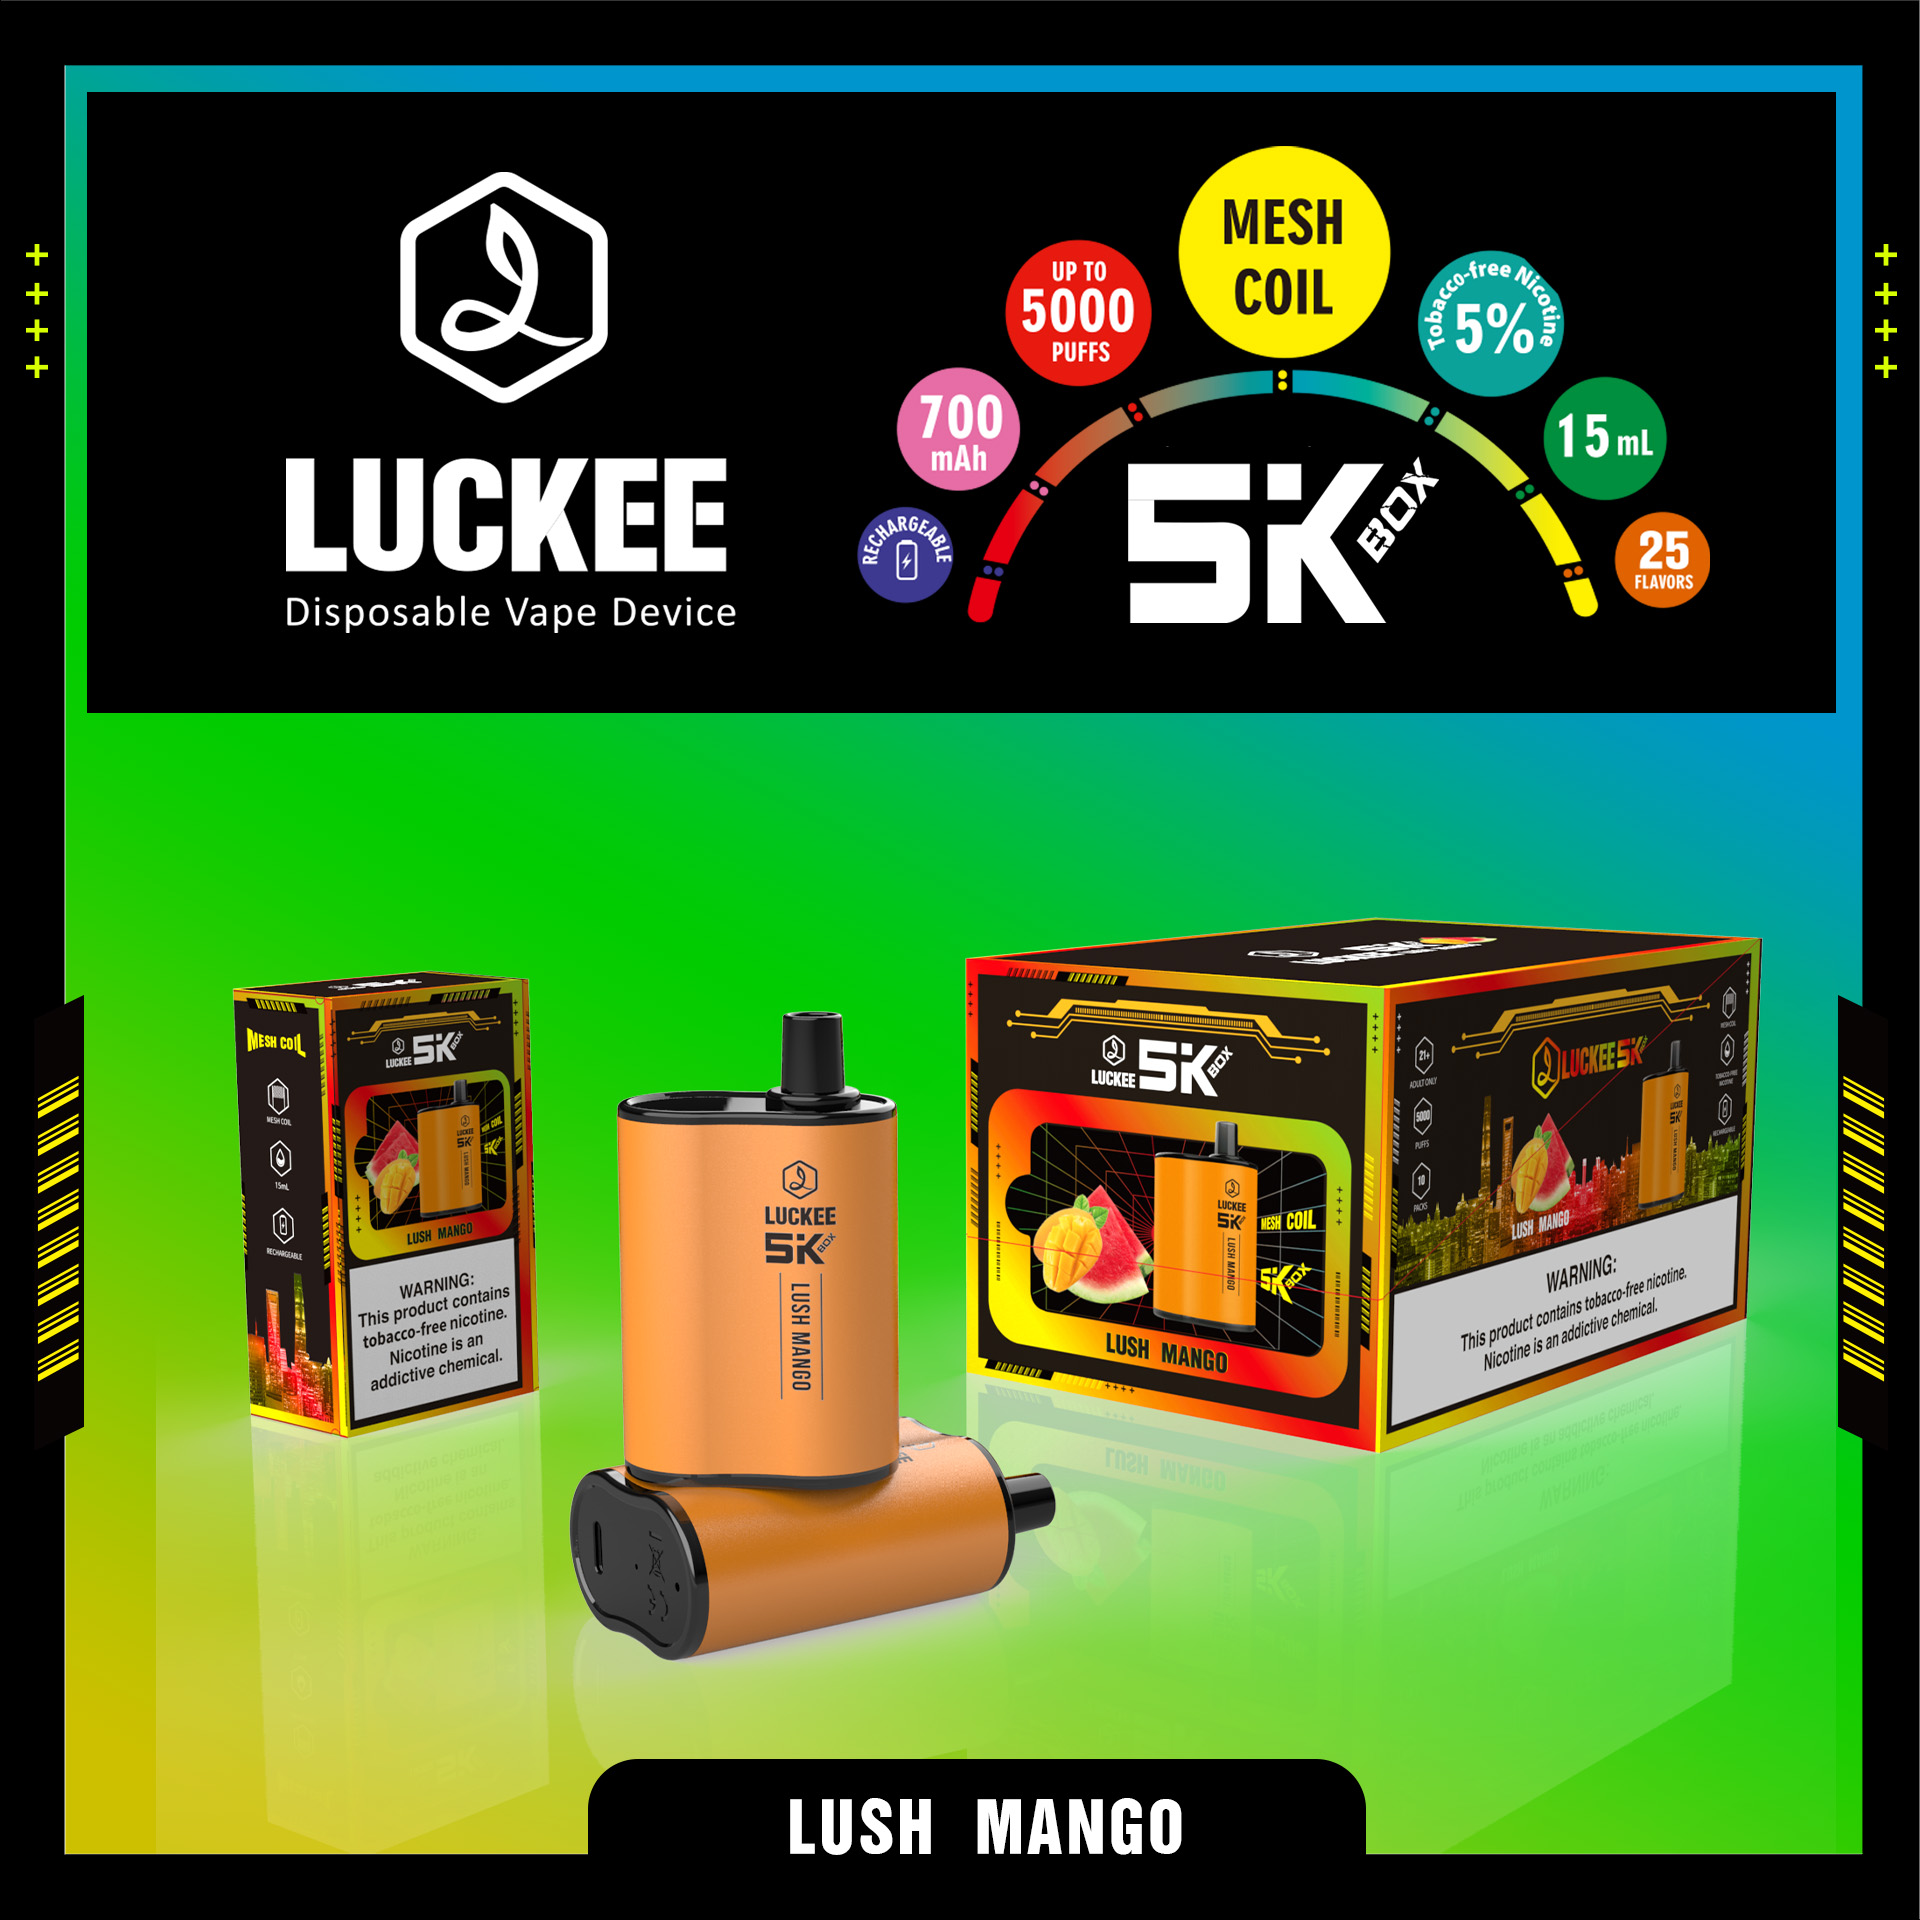 Luckee 5k box disposable vape 5000 puffs mesh coil NEW Package